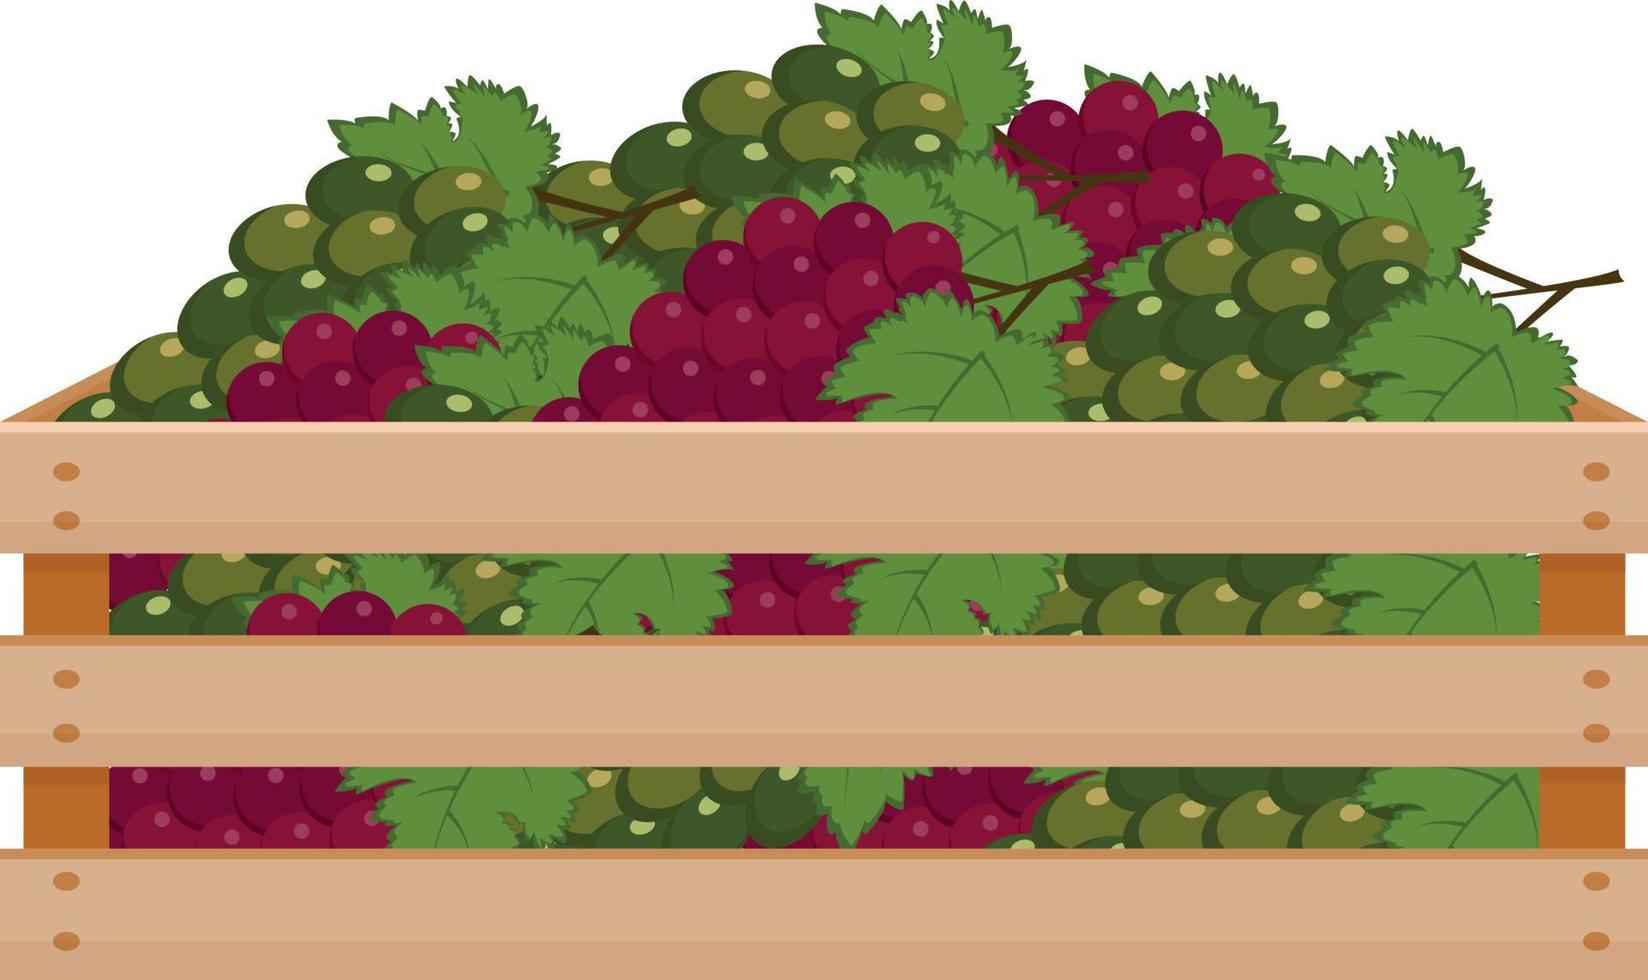 A bright summer illustration depicting a wooden box with ripe grapes of green and red color. The harvested harvest of juicy grapes in a box made of wood. Vector illustration on a white background